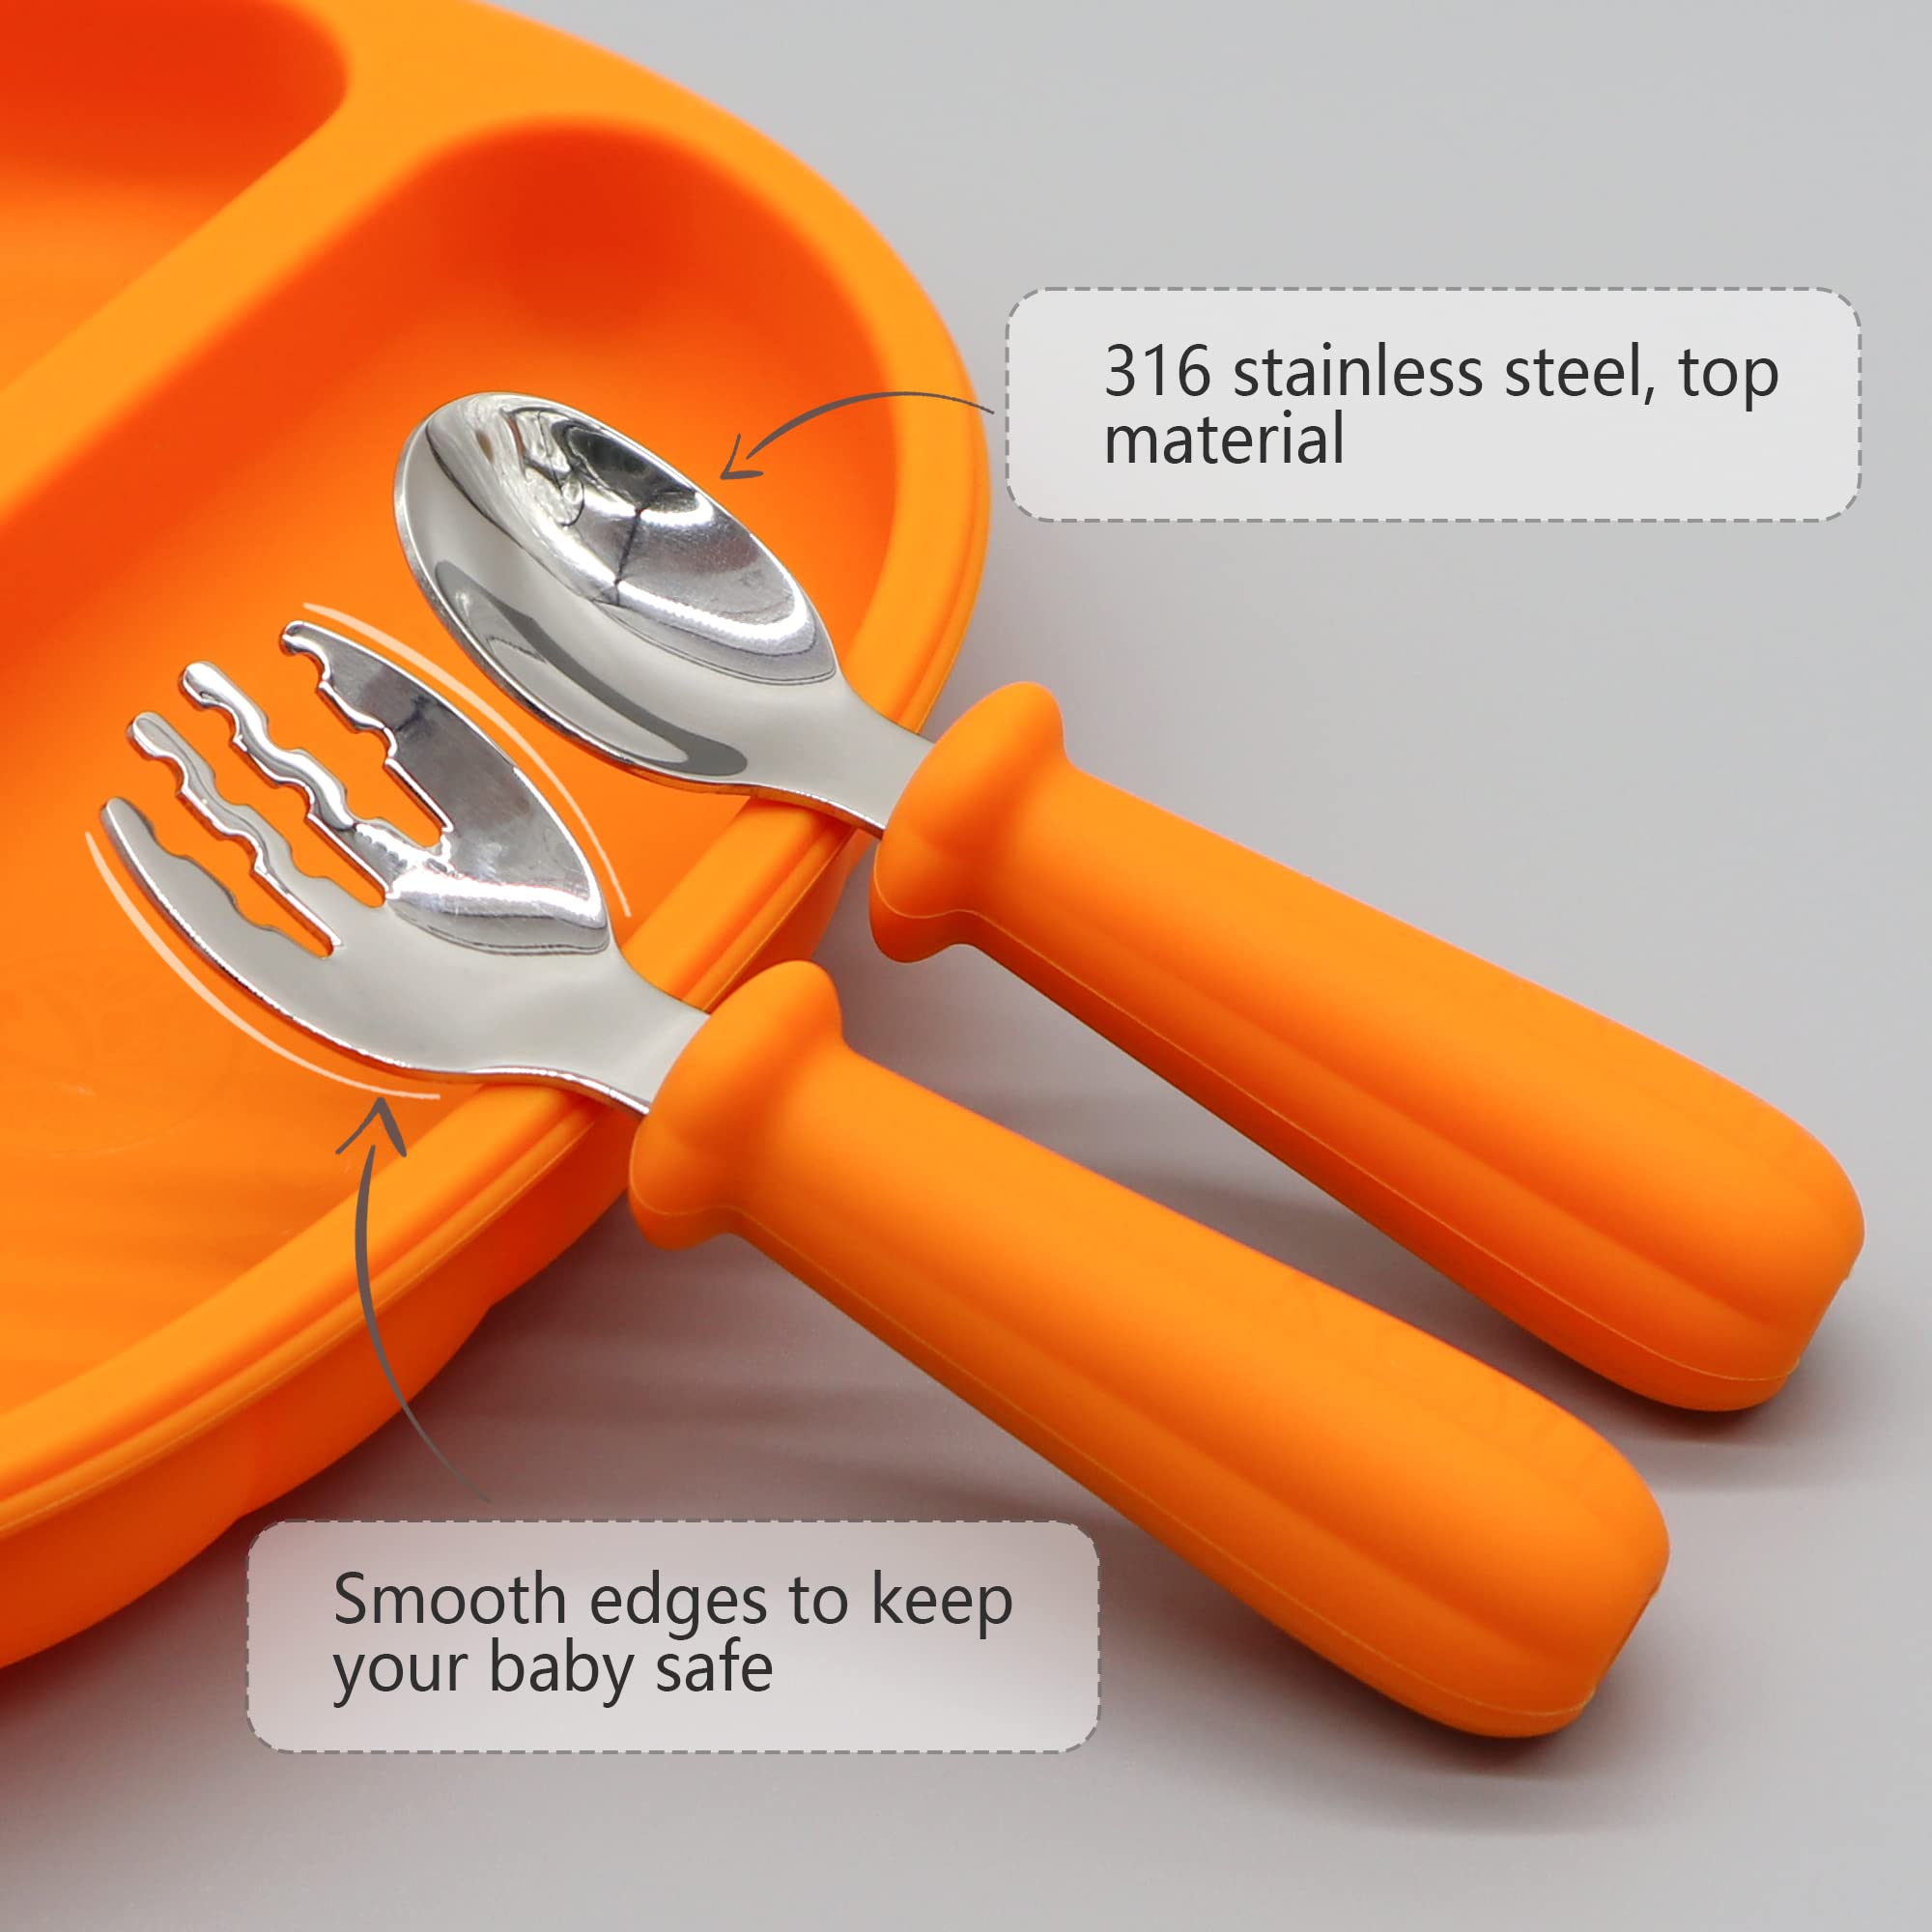 KCMI Silicone Baby Led Weaning 9 Piece Set in Pumpkin Style - Includes Non-BPA Suction Plate with Divider, Suction Bowl, Pocket Bib, Cup Lid, Straw, Spoon, Fork, Plate Lid & Sippy Cup - Orange